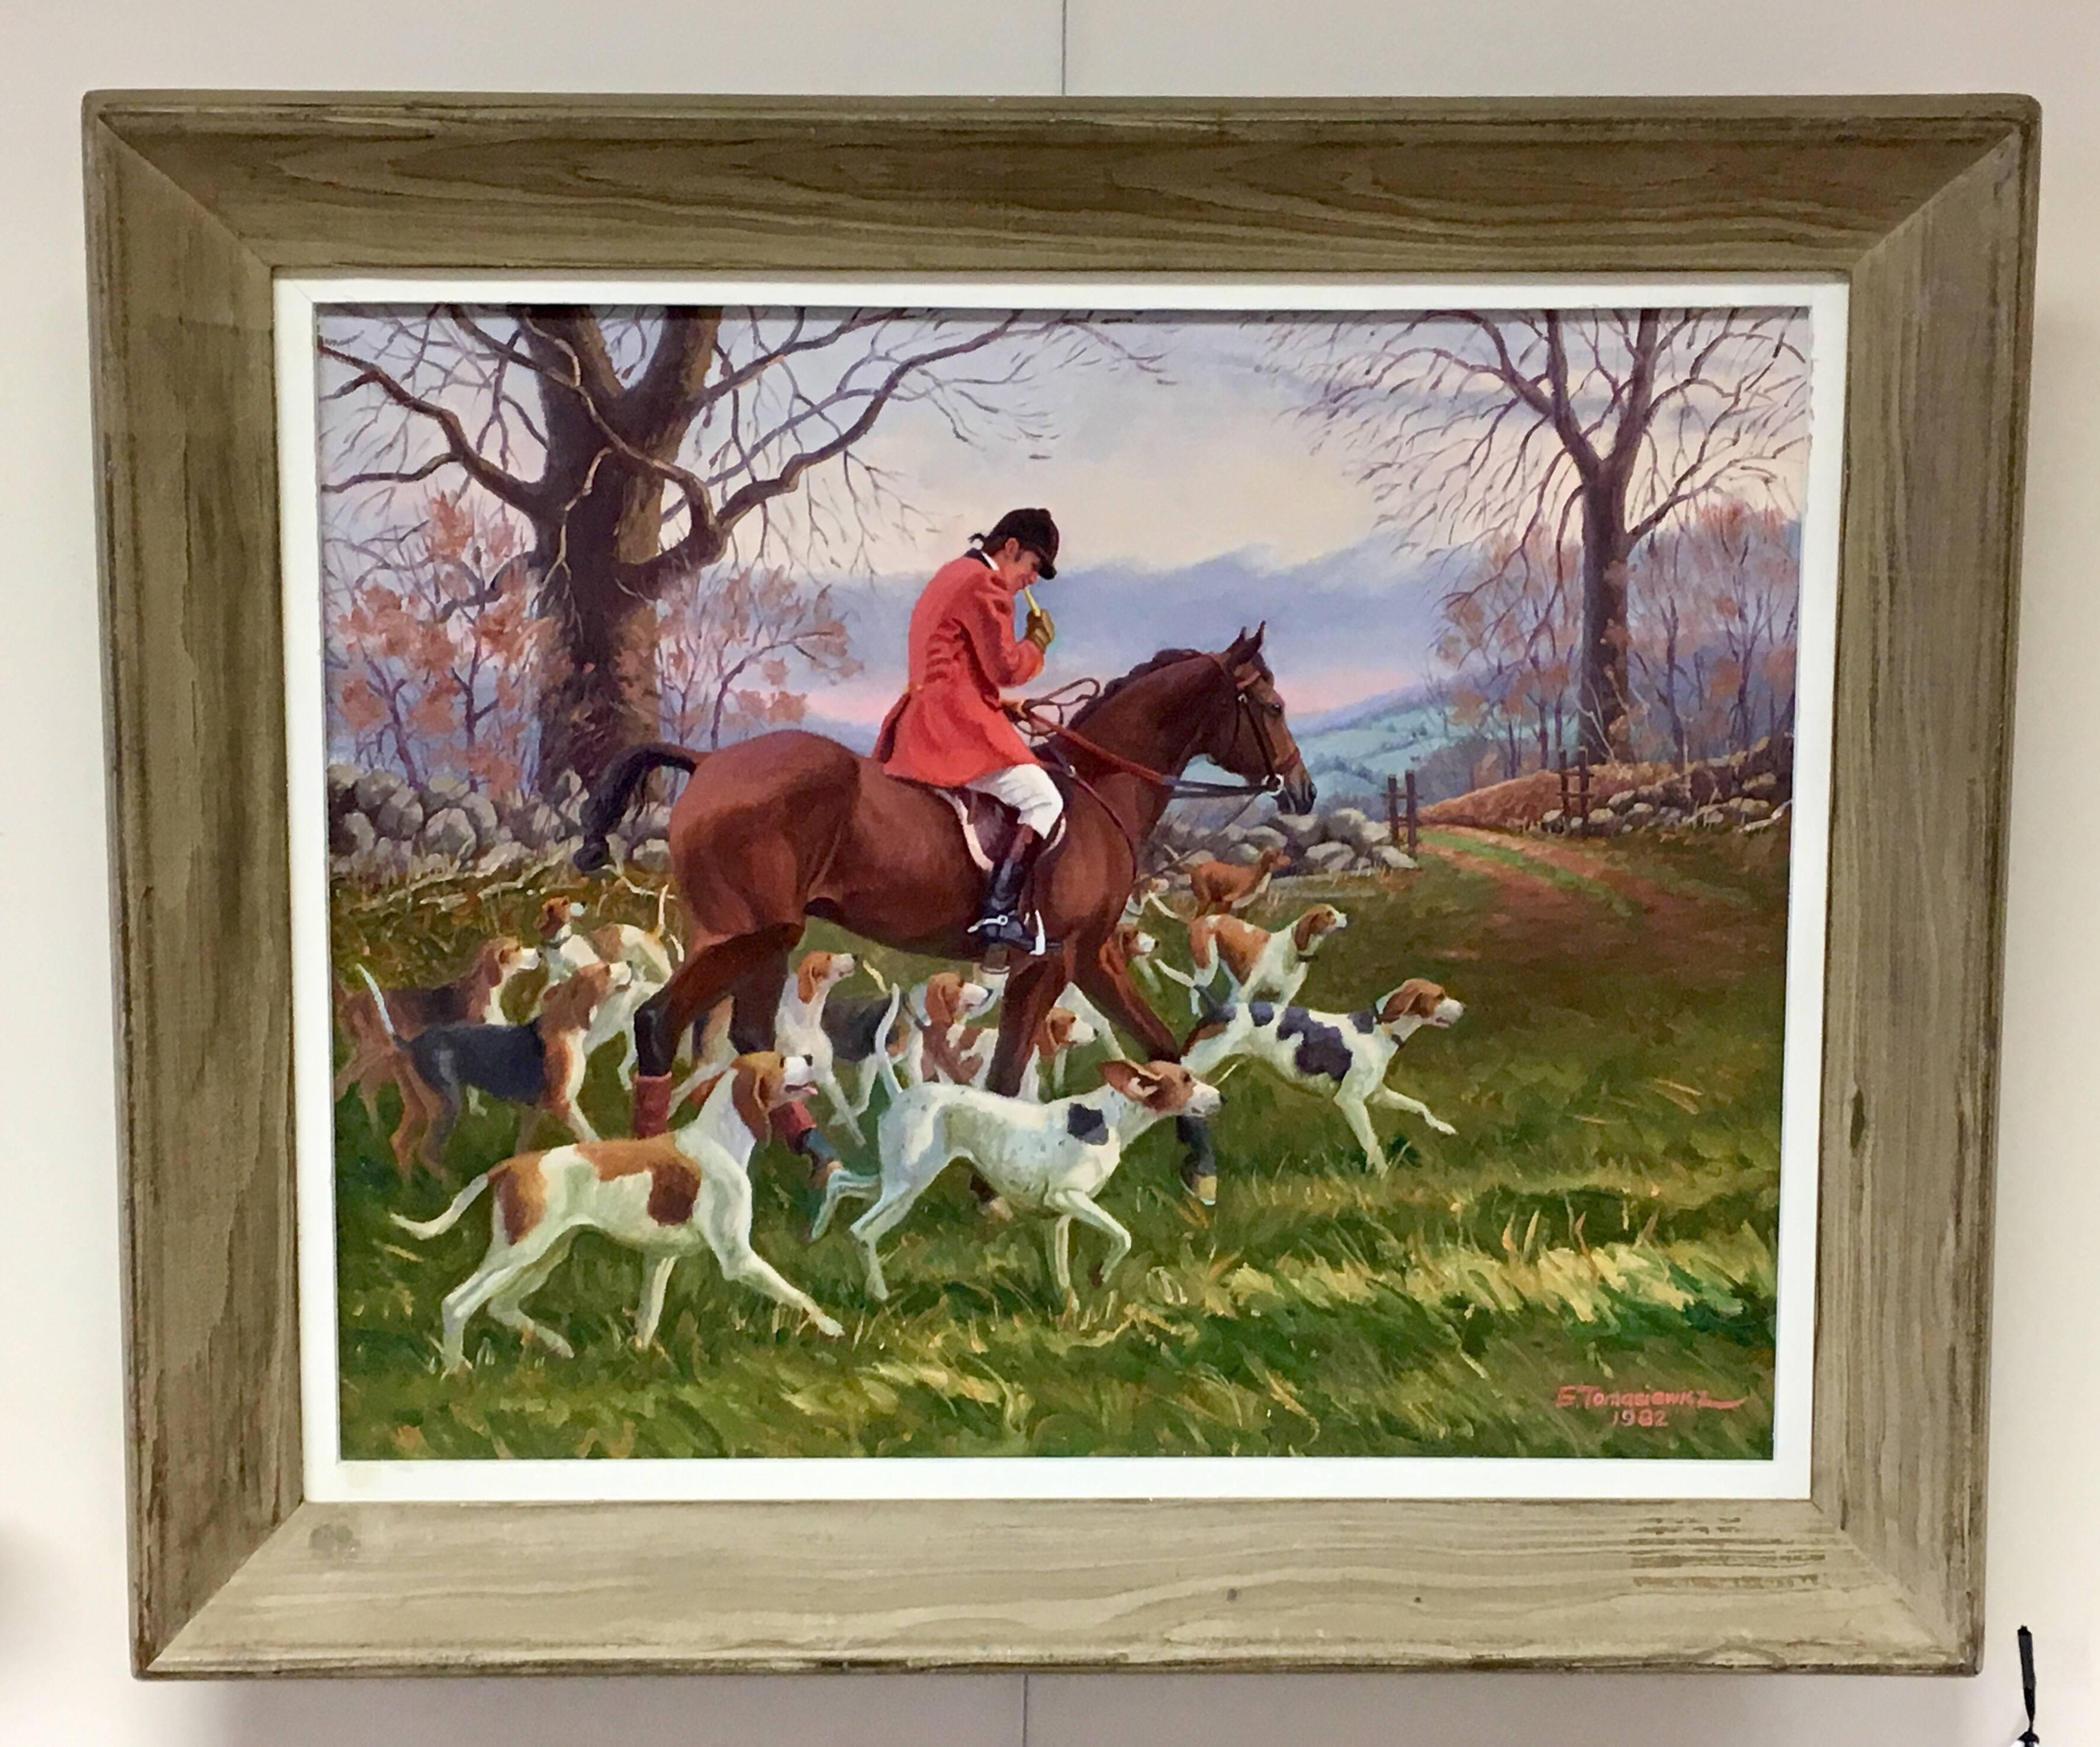 Stunning original Edward Tomasiewicz (1919 - 2006) large oil painting depicting a hunt scene in the countryside. His work is featured in and around the northeast part of the United States. Medium is oil on canvas and frame is original.